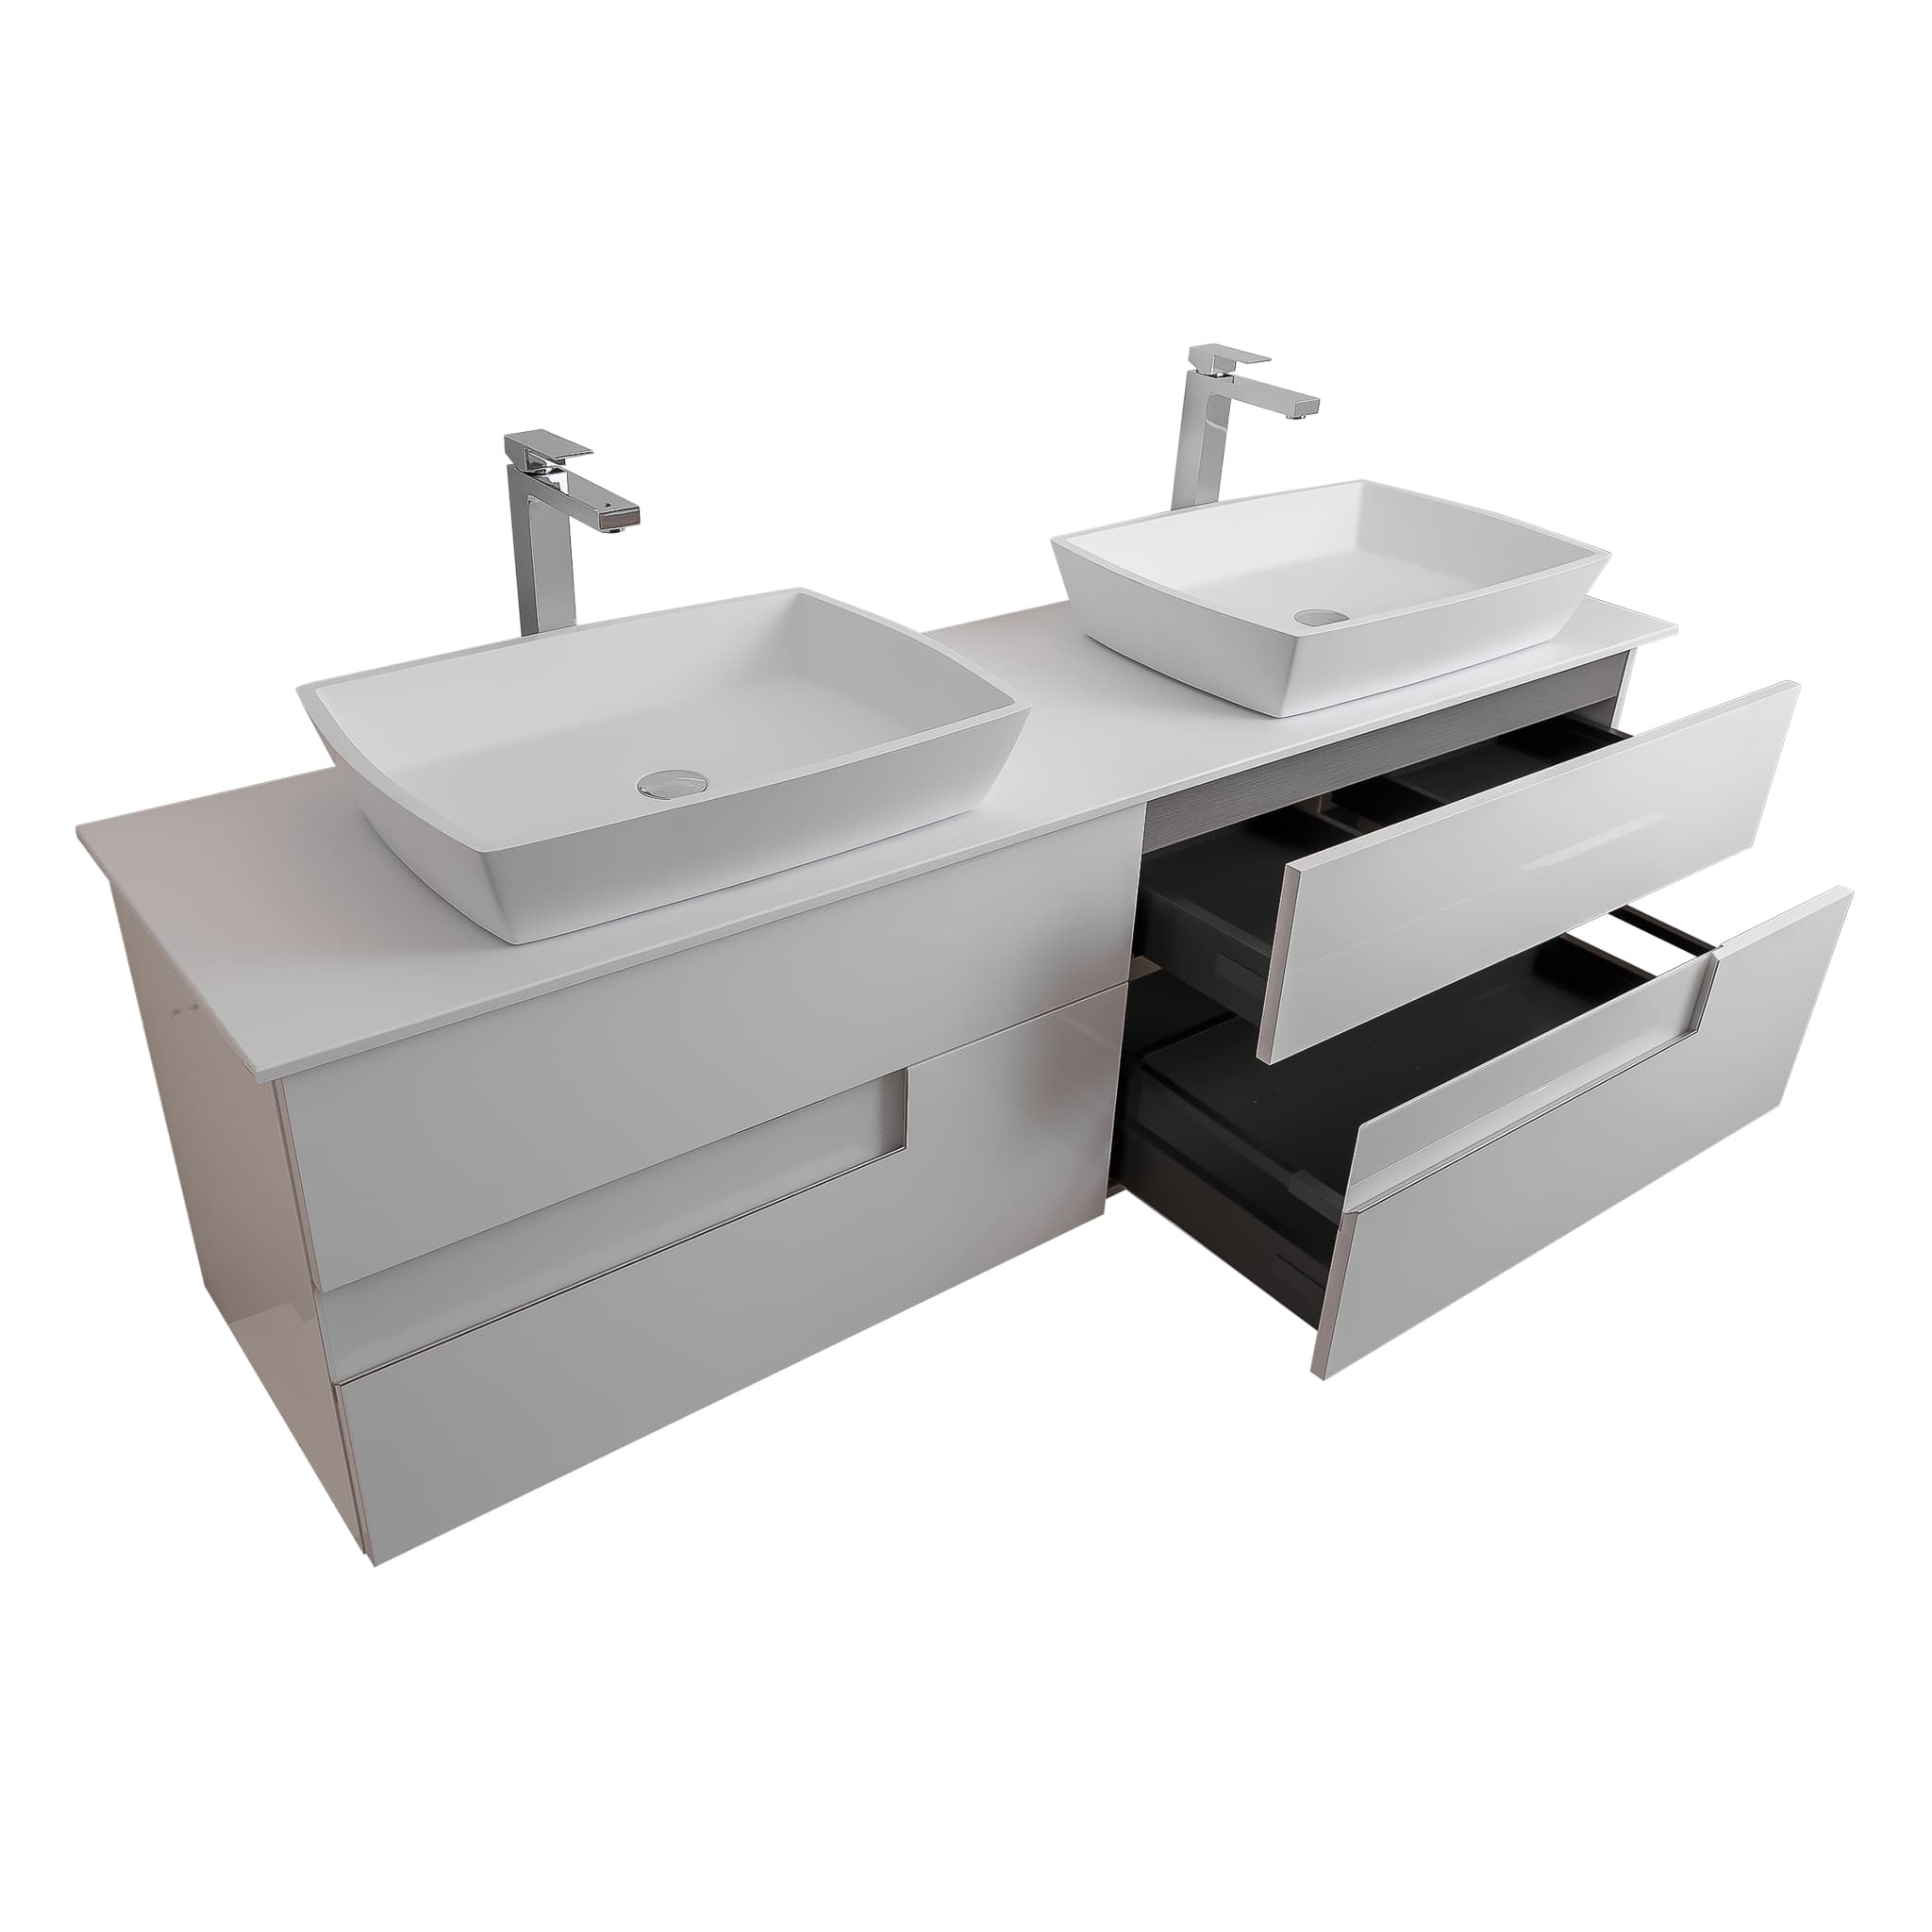 Vision 63 White High Gloss Cabinet, Solid Surface Flat White Counter And Two Square Solid Surface White Basin 1316, Wall Mounted Modern Vanity Set